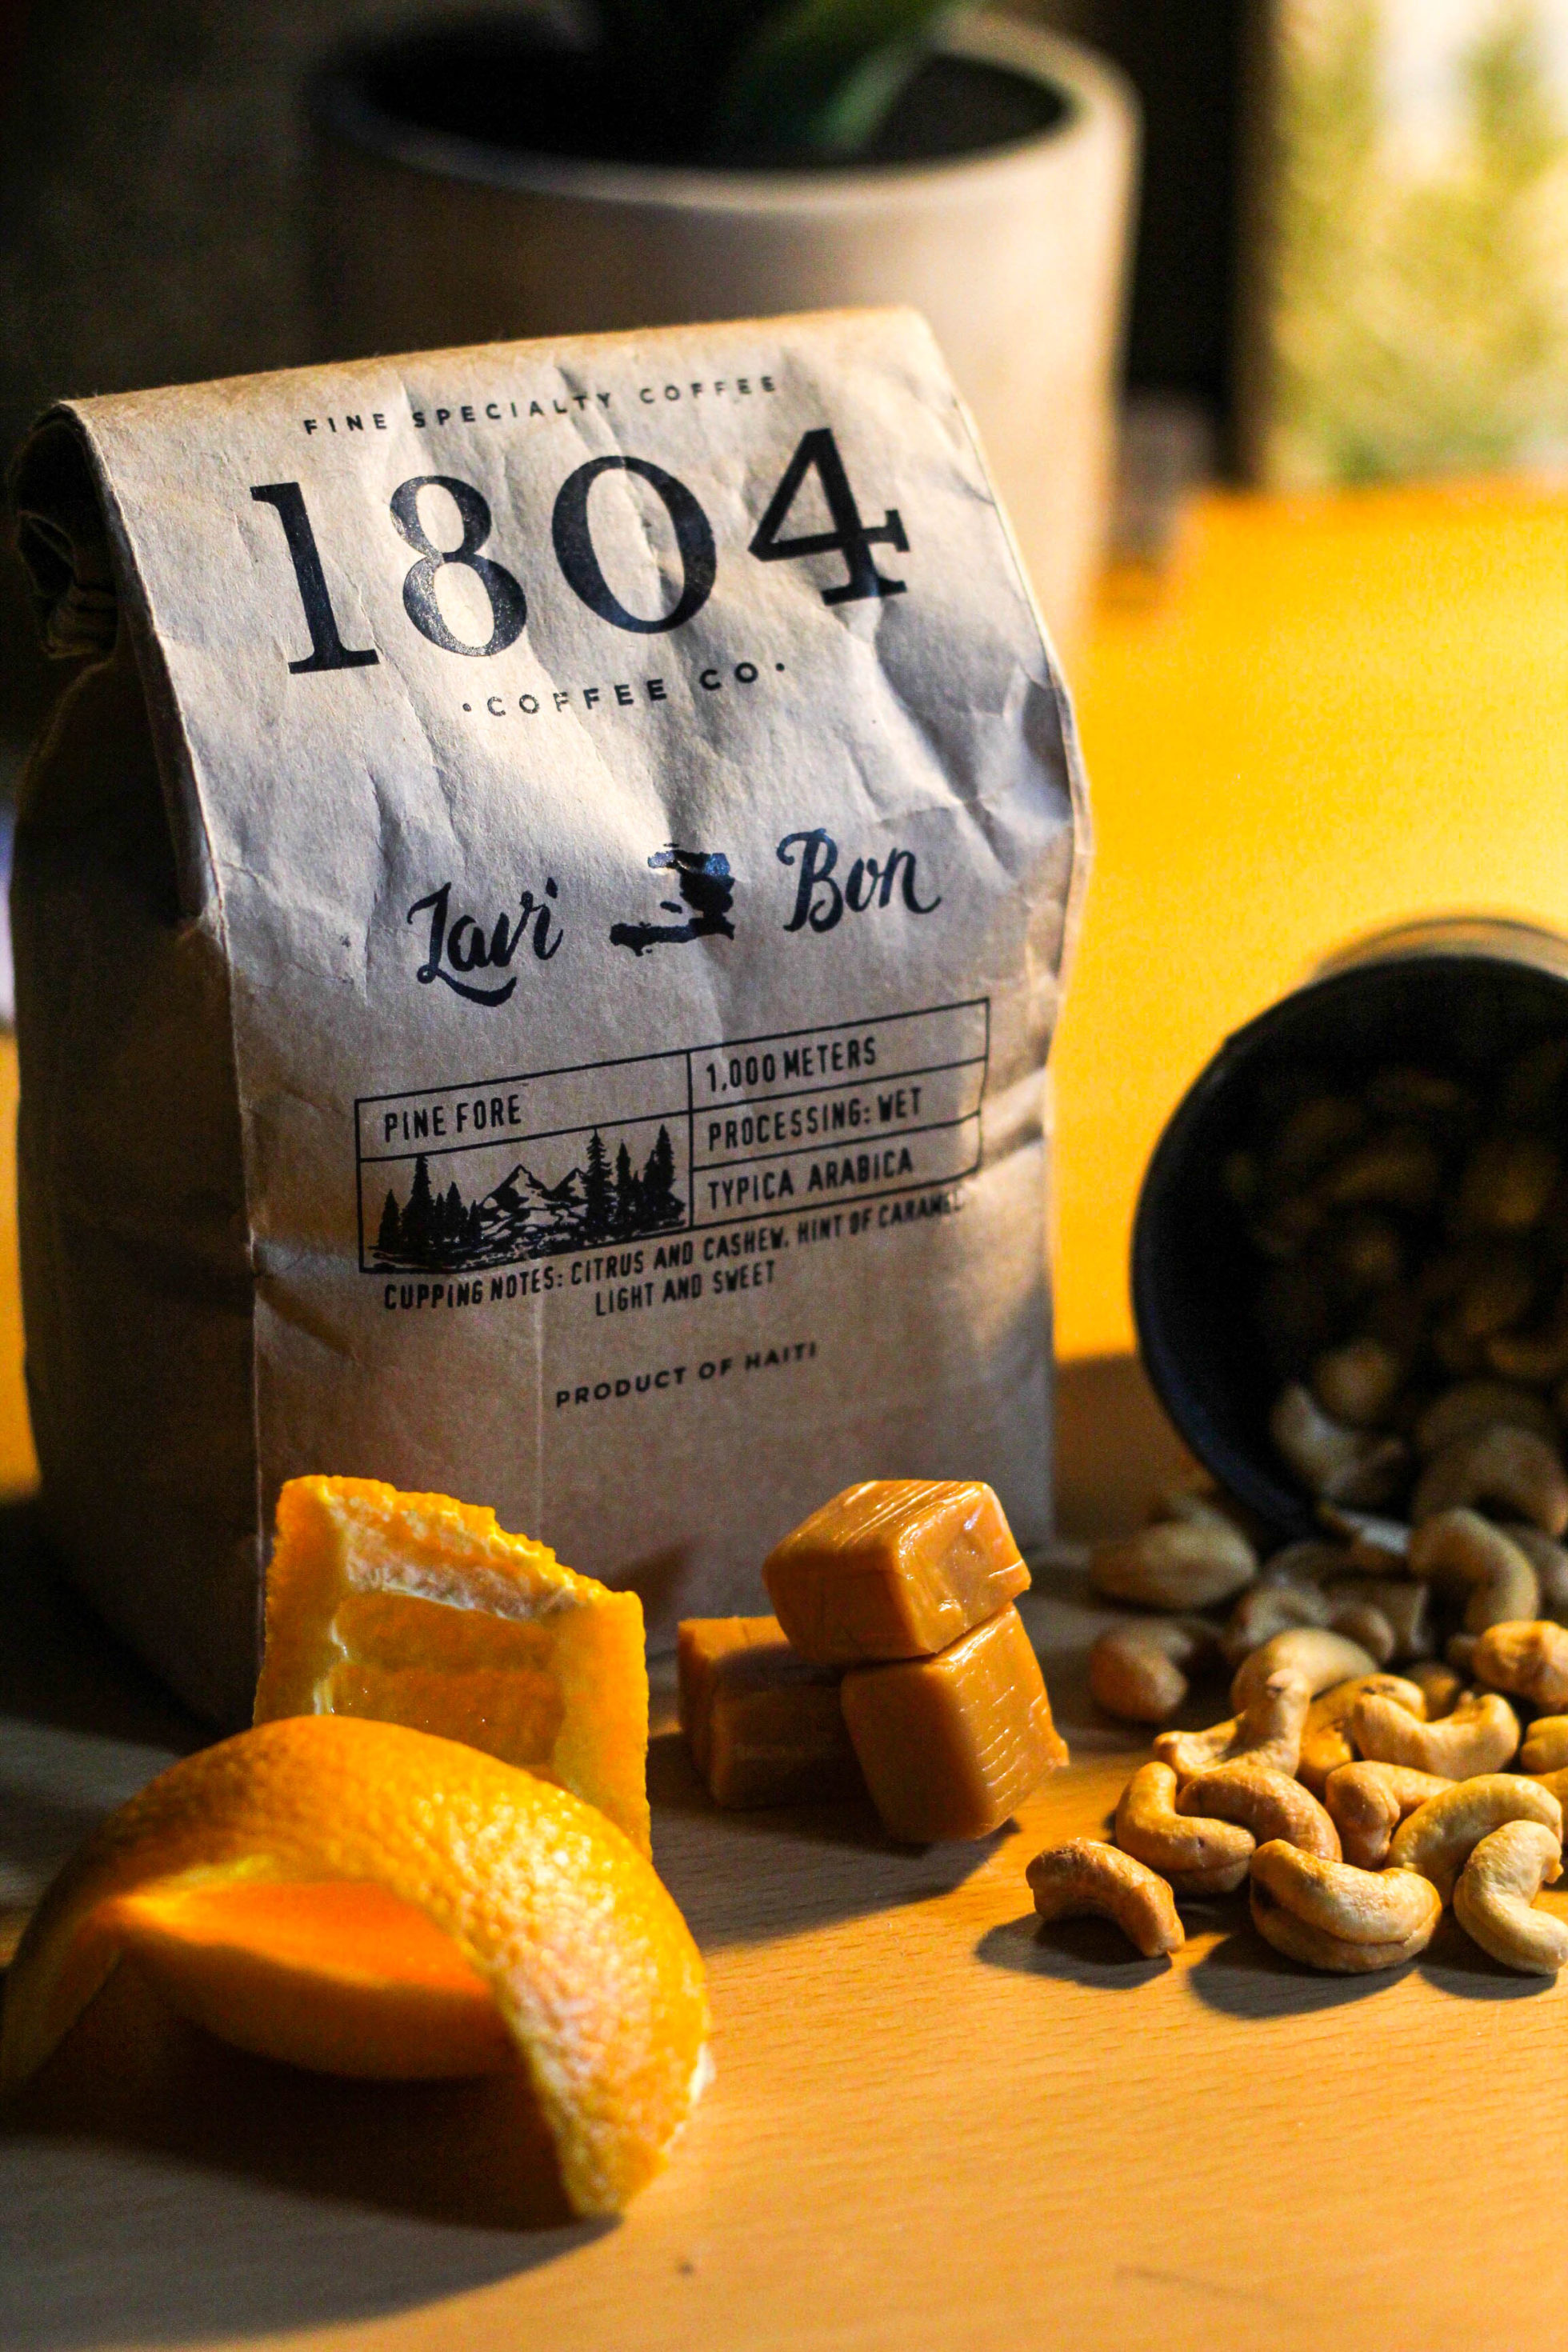 Making Thanksgiving Memorable With 1804 Coffee